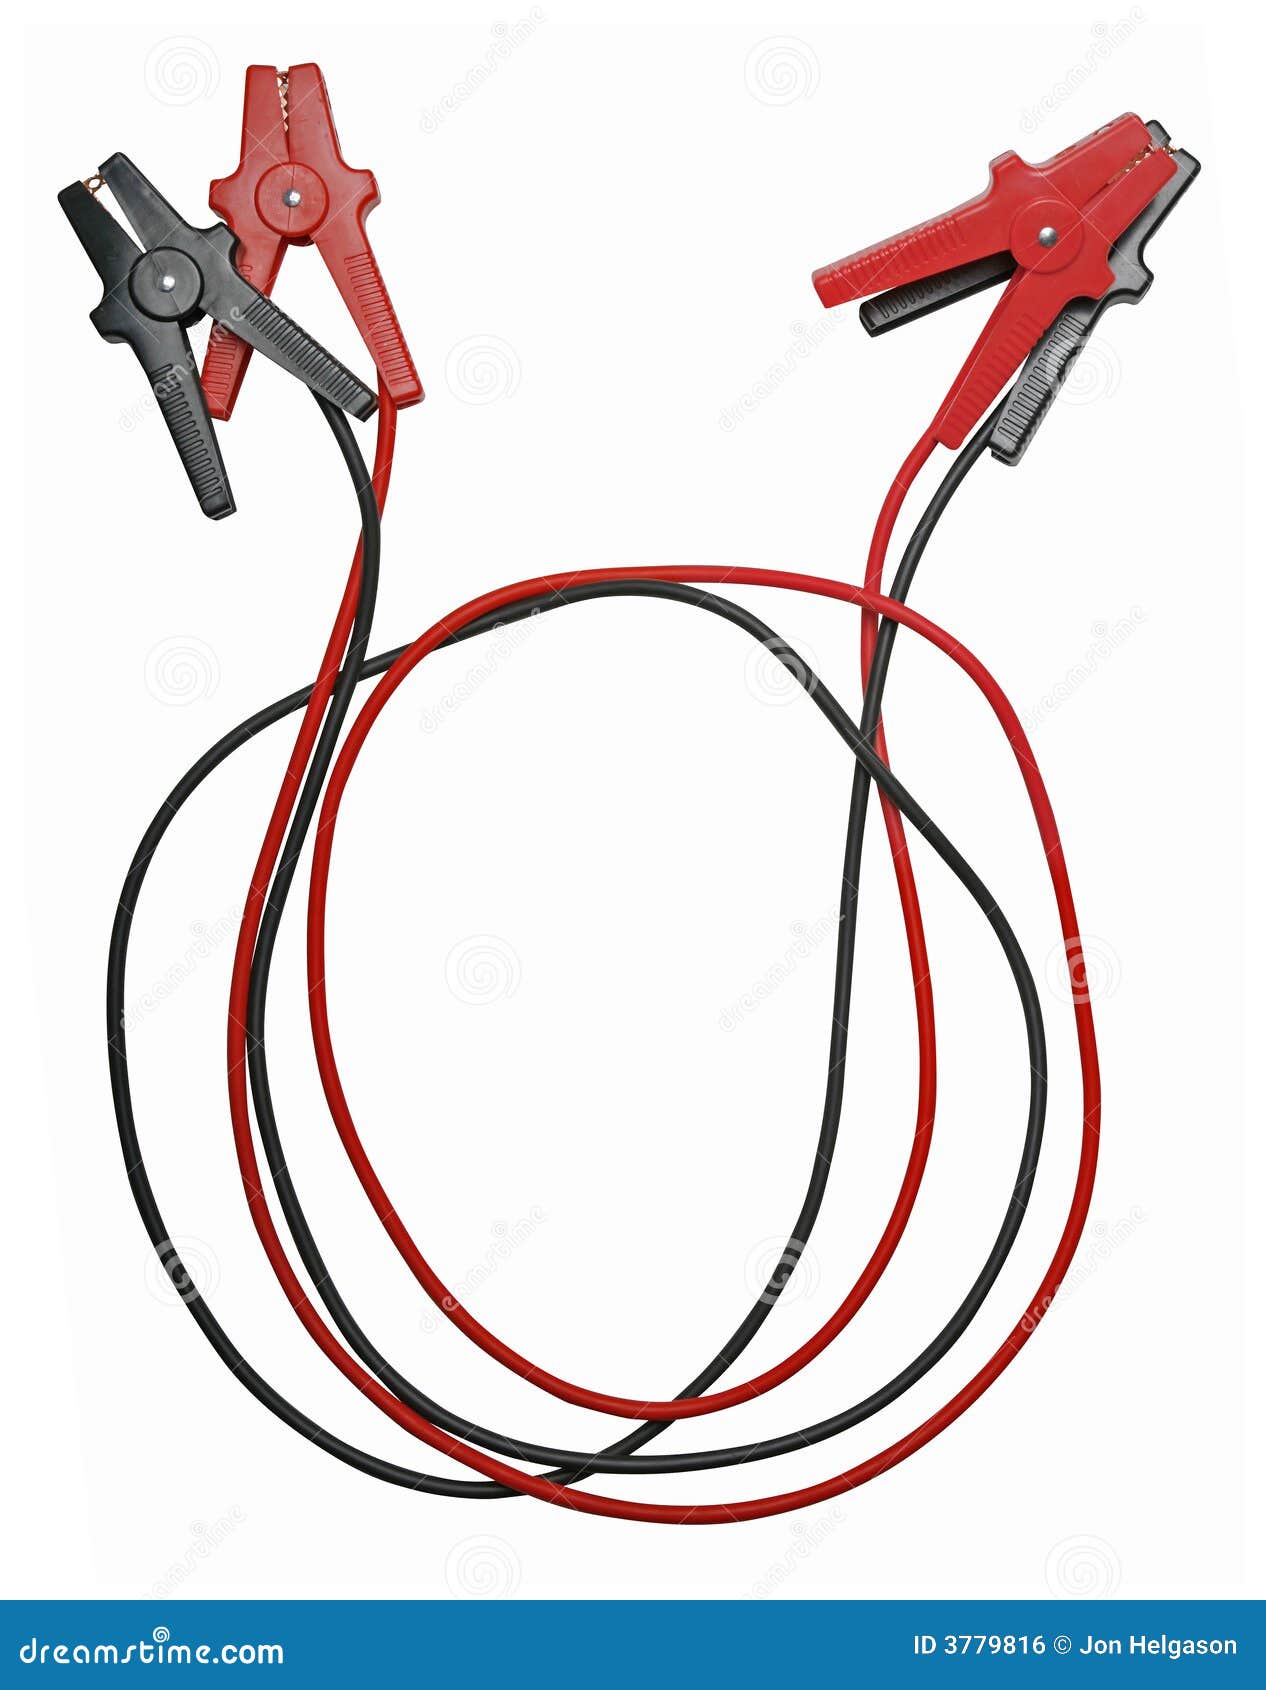 jumper cables  on white